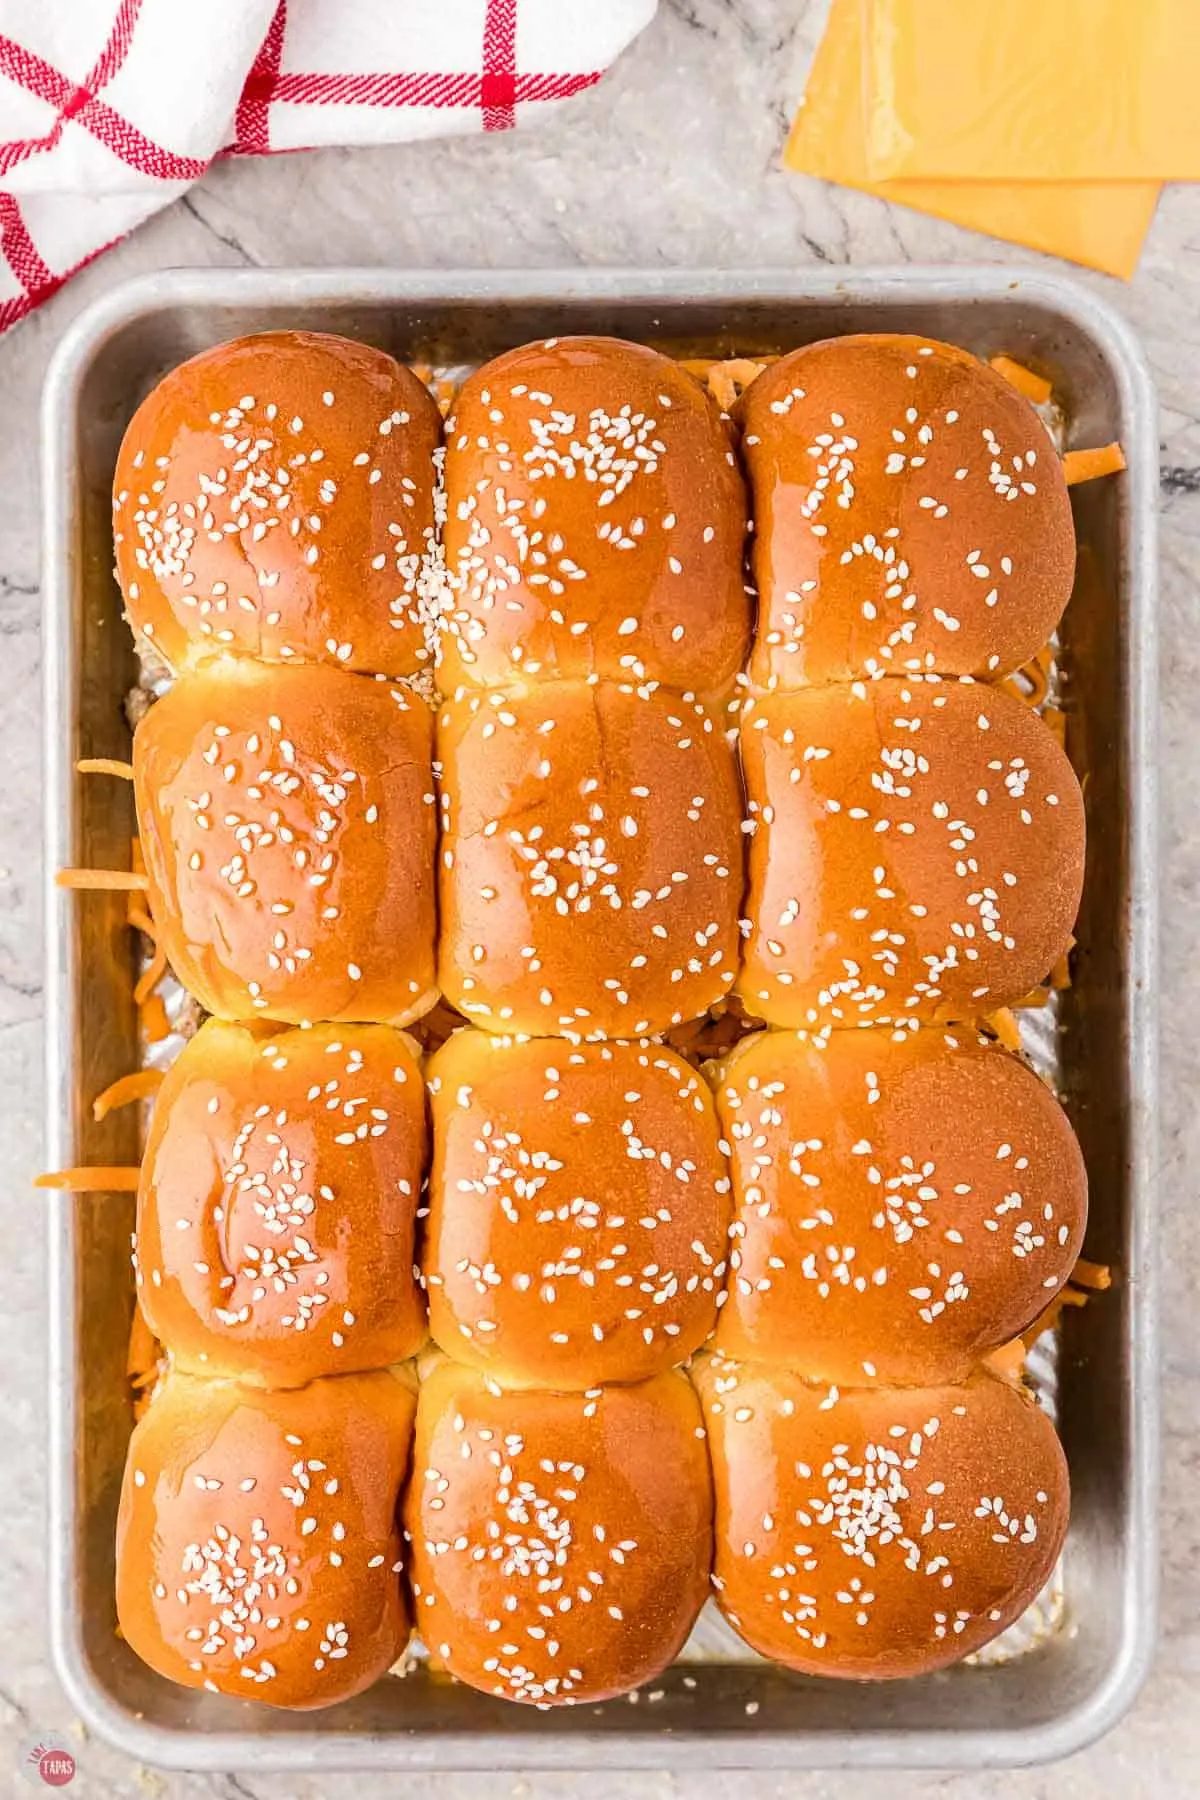 unbaked cheeseburger sliders with sesame seeds on tops of buns